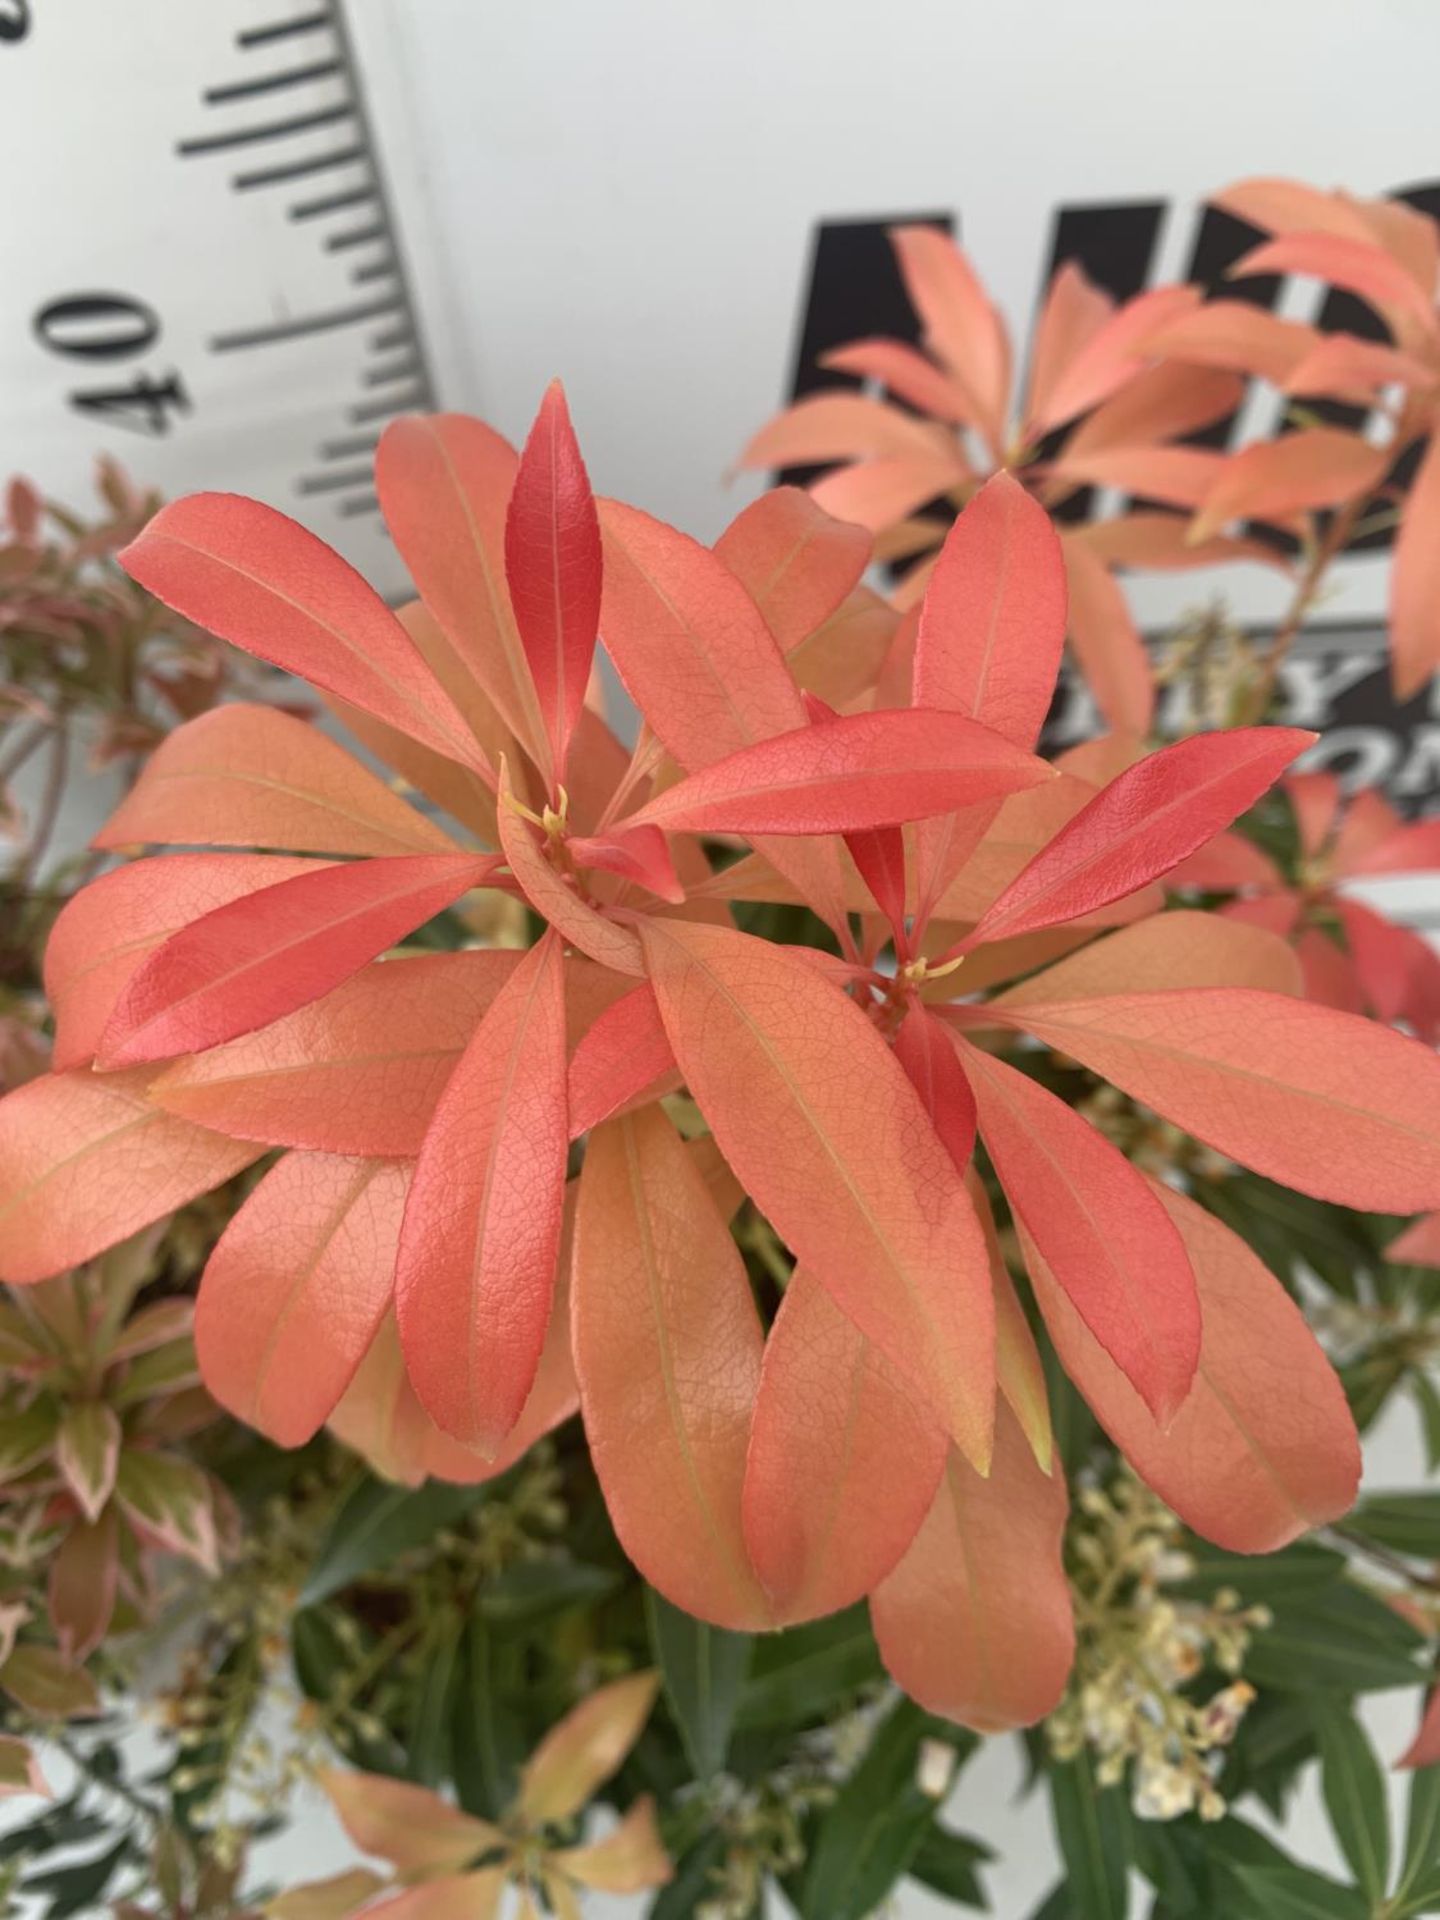 TWO PIERIS JAPONICA 'LITTLE HEATH' AND 'FOREST FLAME' IN 3 LTR POTS 55CM TALL PLUS VAT TO BE SOLD - Image 6 of 6